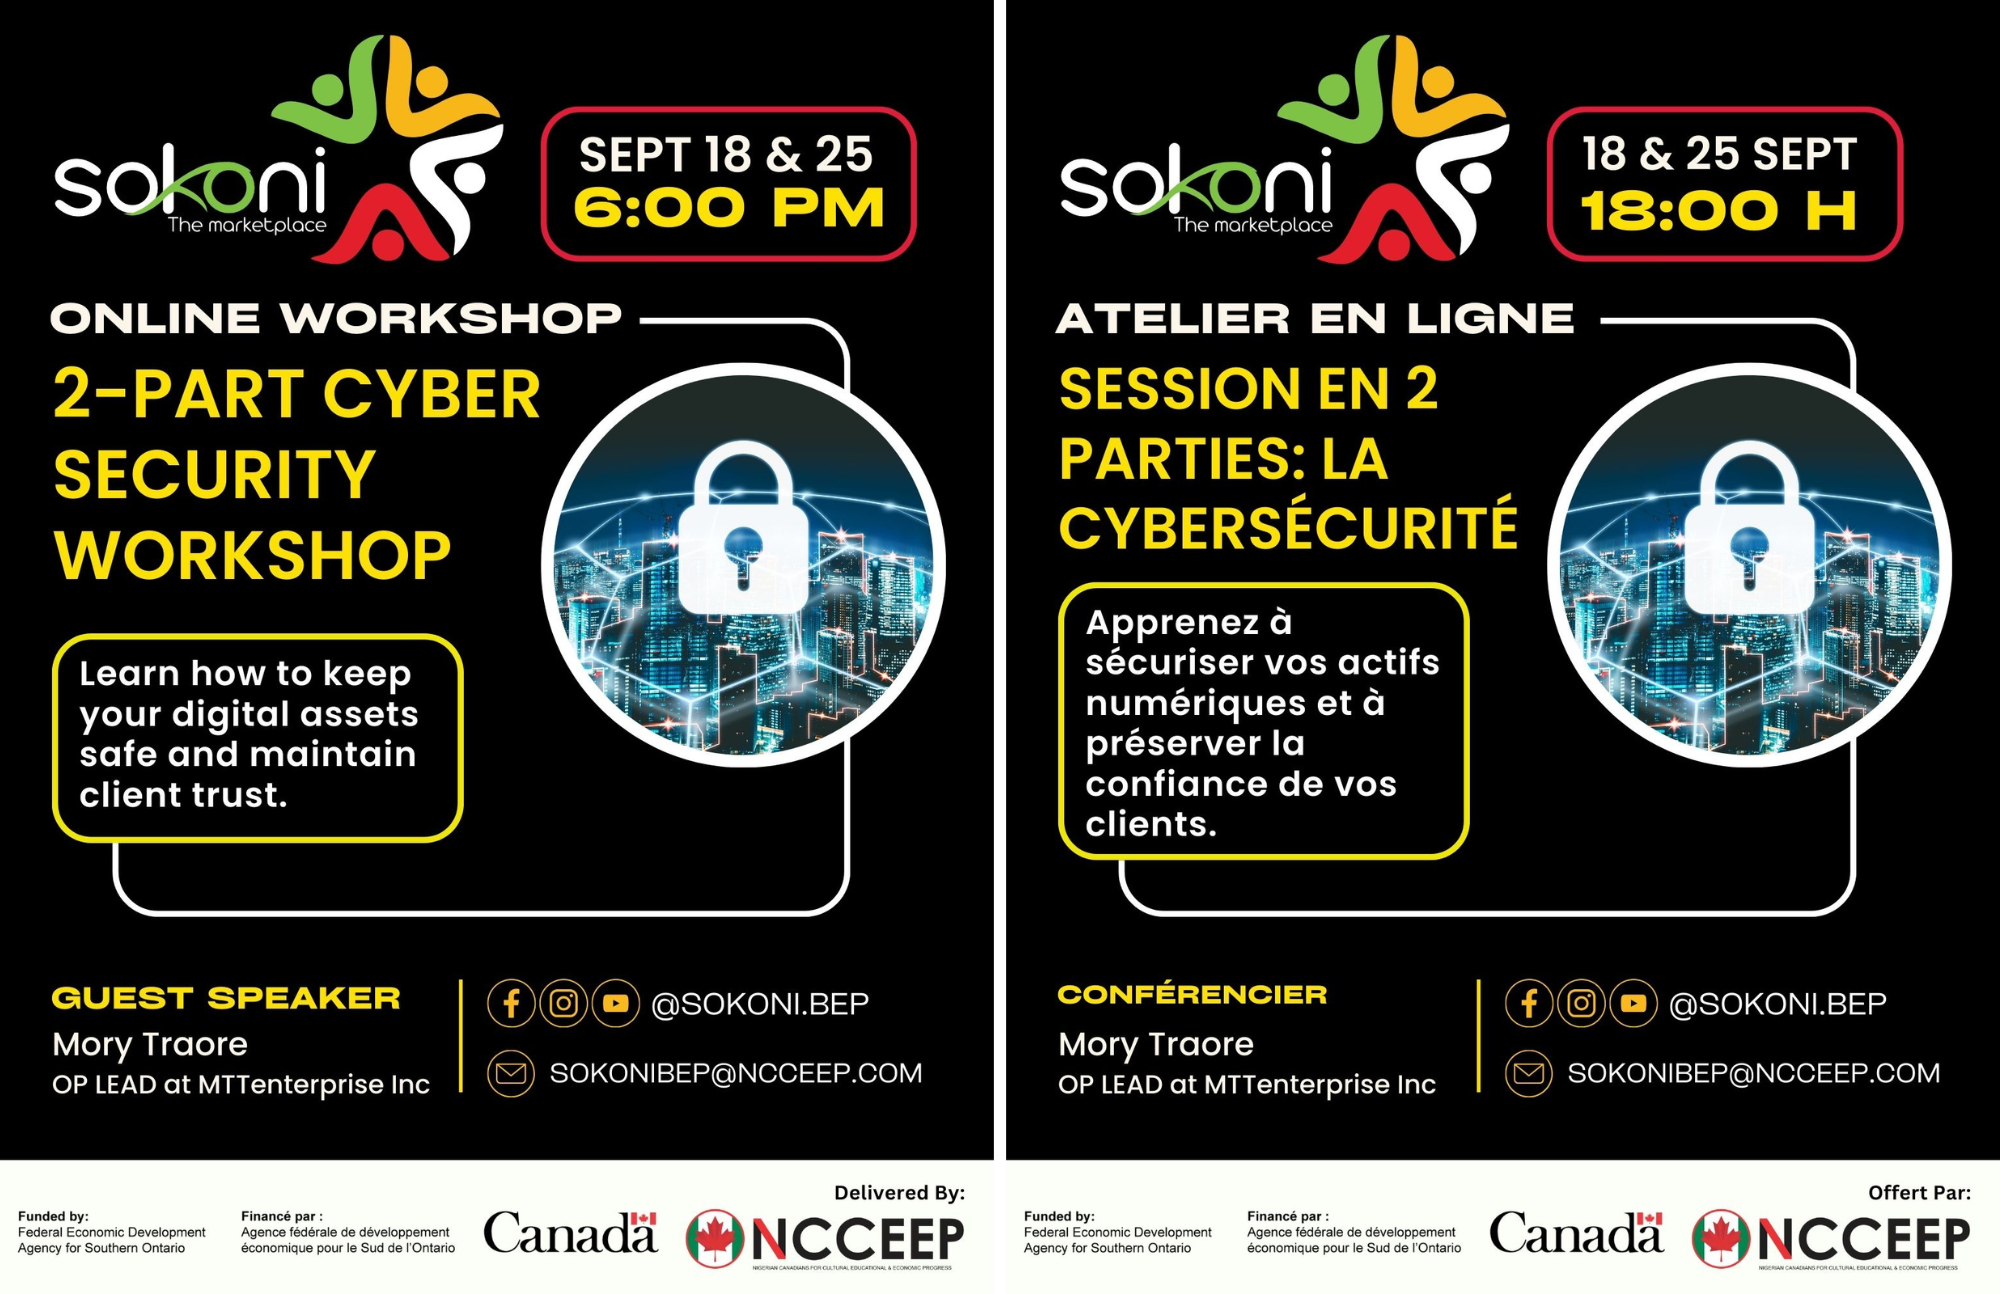 French and English flyer for the September 18th and 25th B.E.P Online Workshop. Date: Monday, September 18 Time 6:00 PM EST Location: Zoom Meeting Topic: Cyber Security Workshop Part 1 Date: Monday, September 25 Time 6:00 PM EST Location: Zoom Meeting Topic: Cyber Security Workshop Part 2